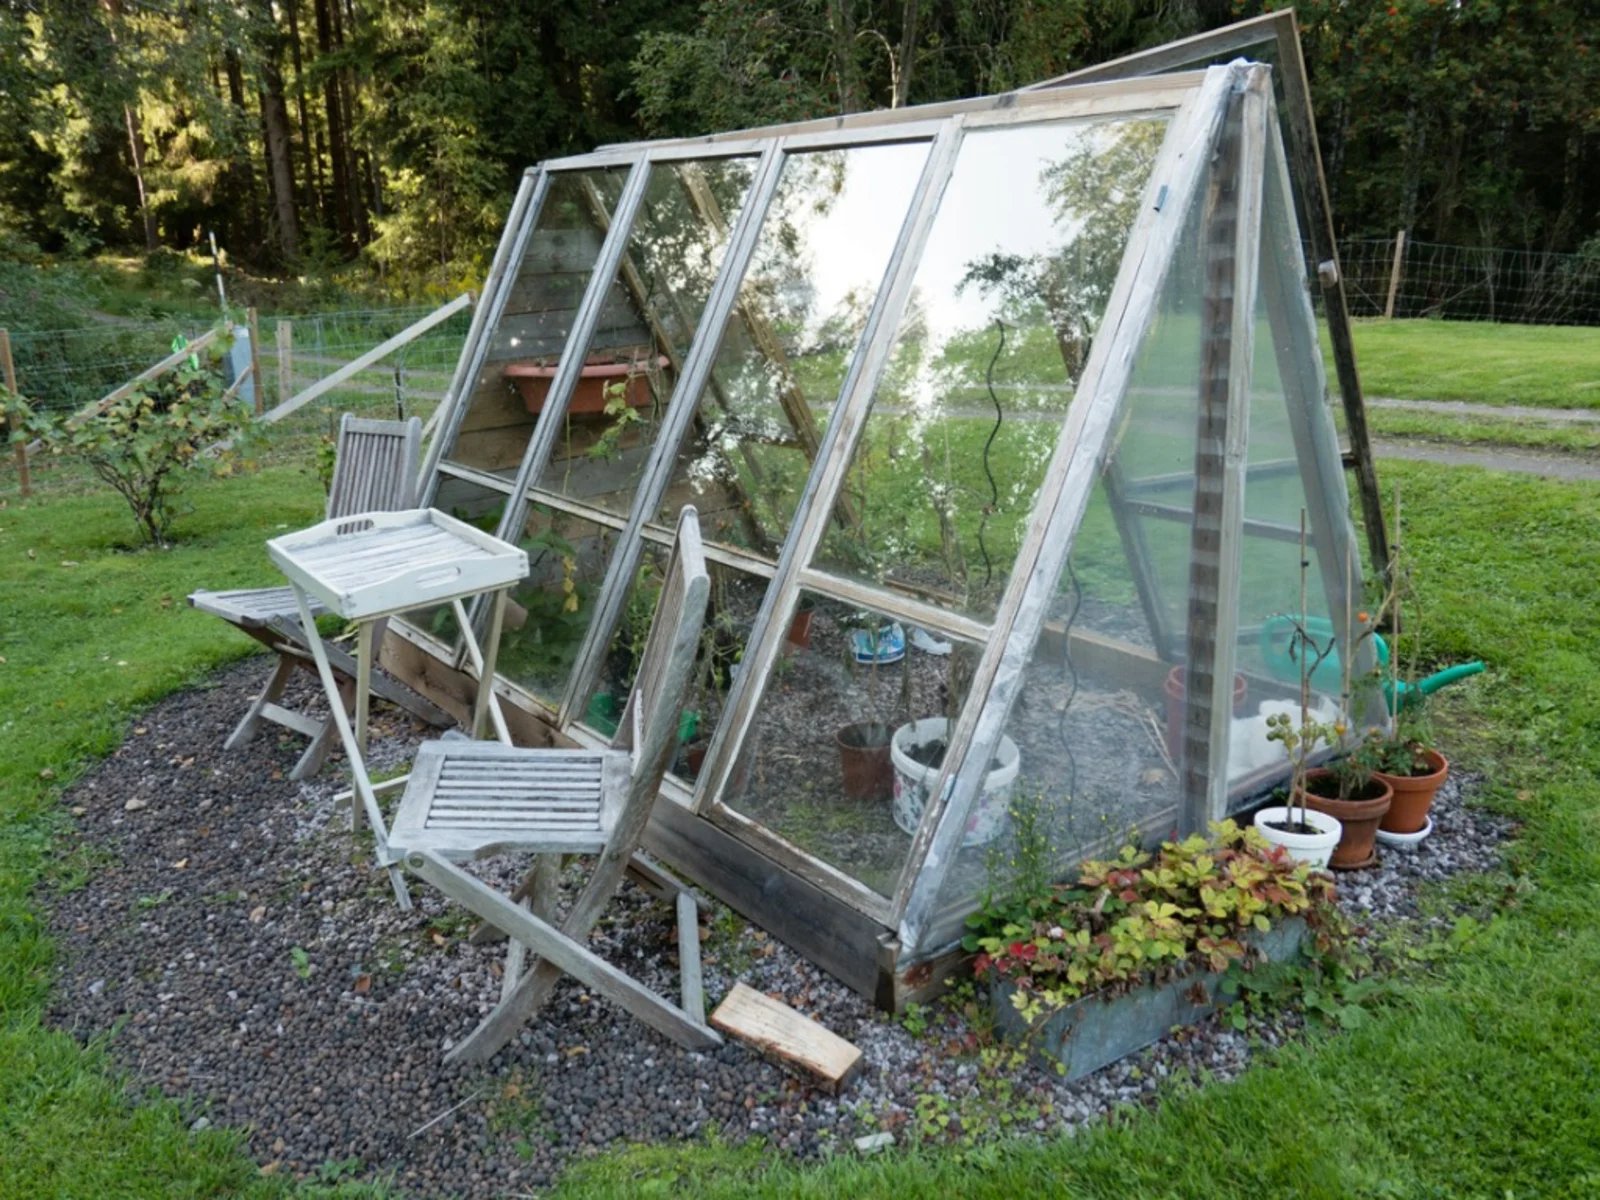 How To Build A Greenhouse Out Of Old Windows